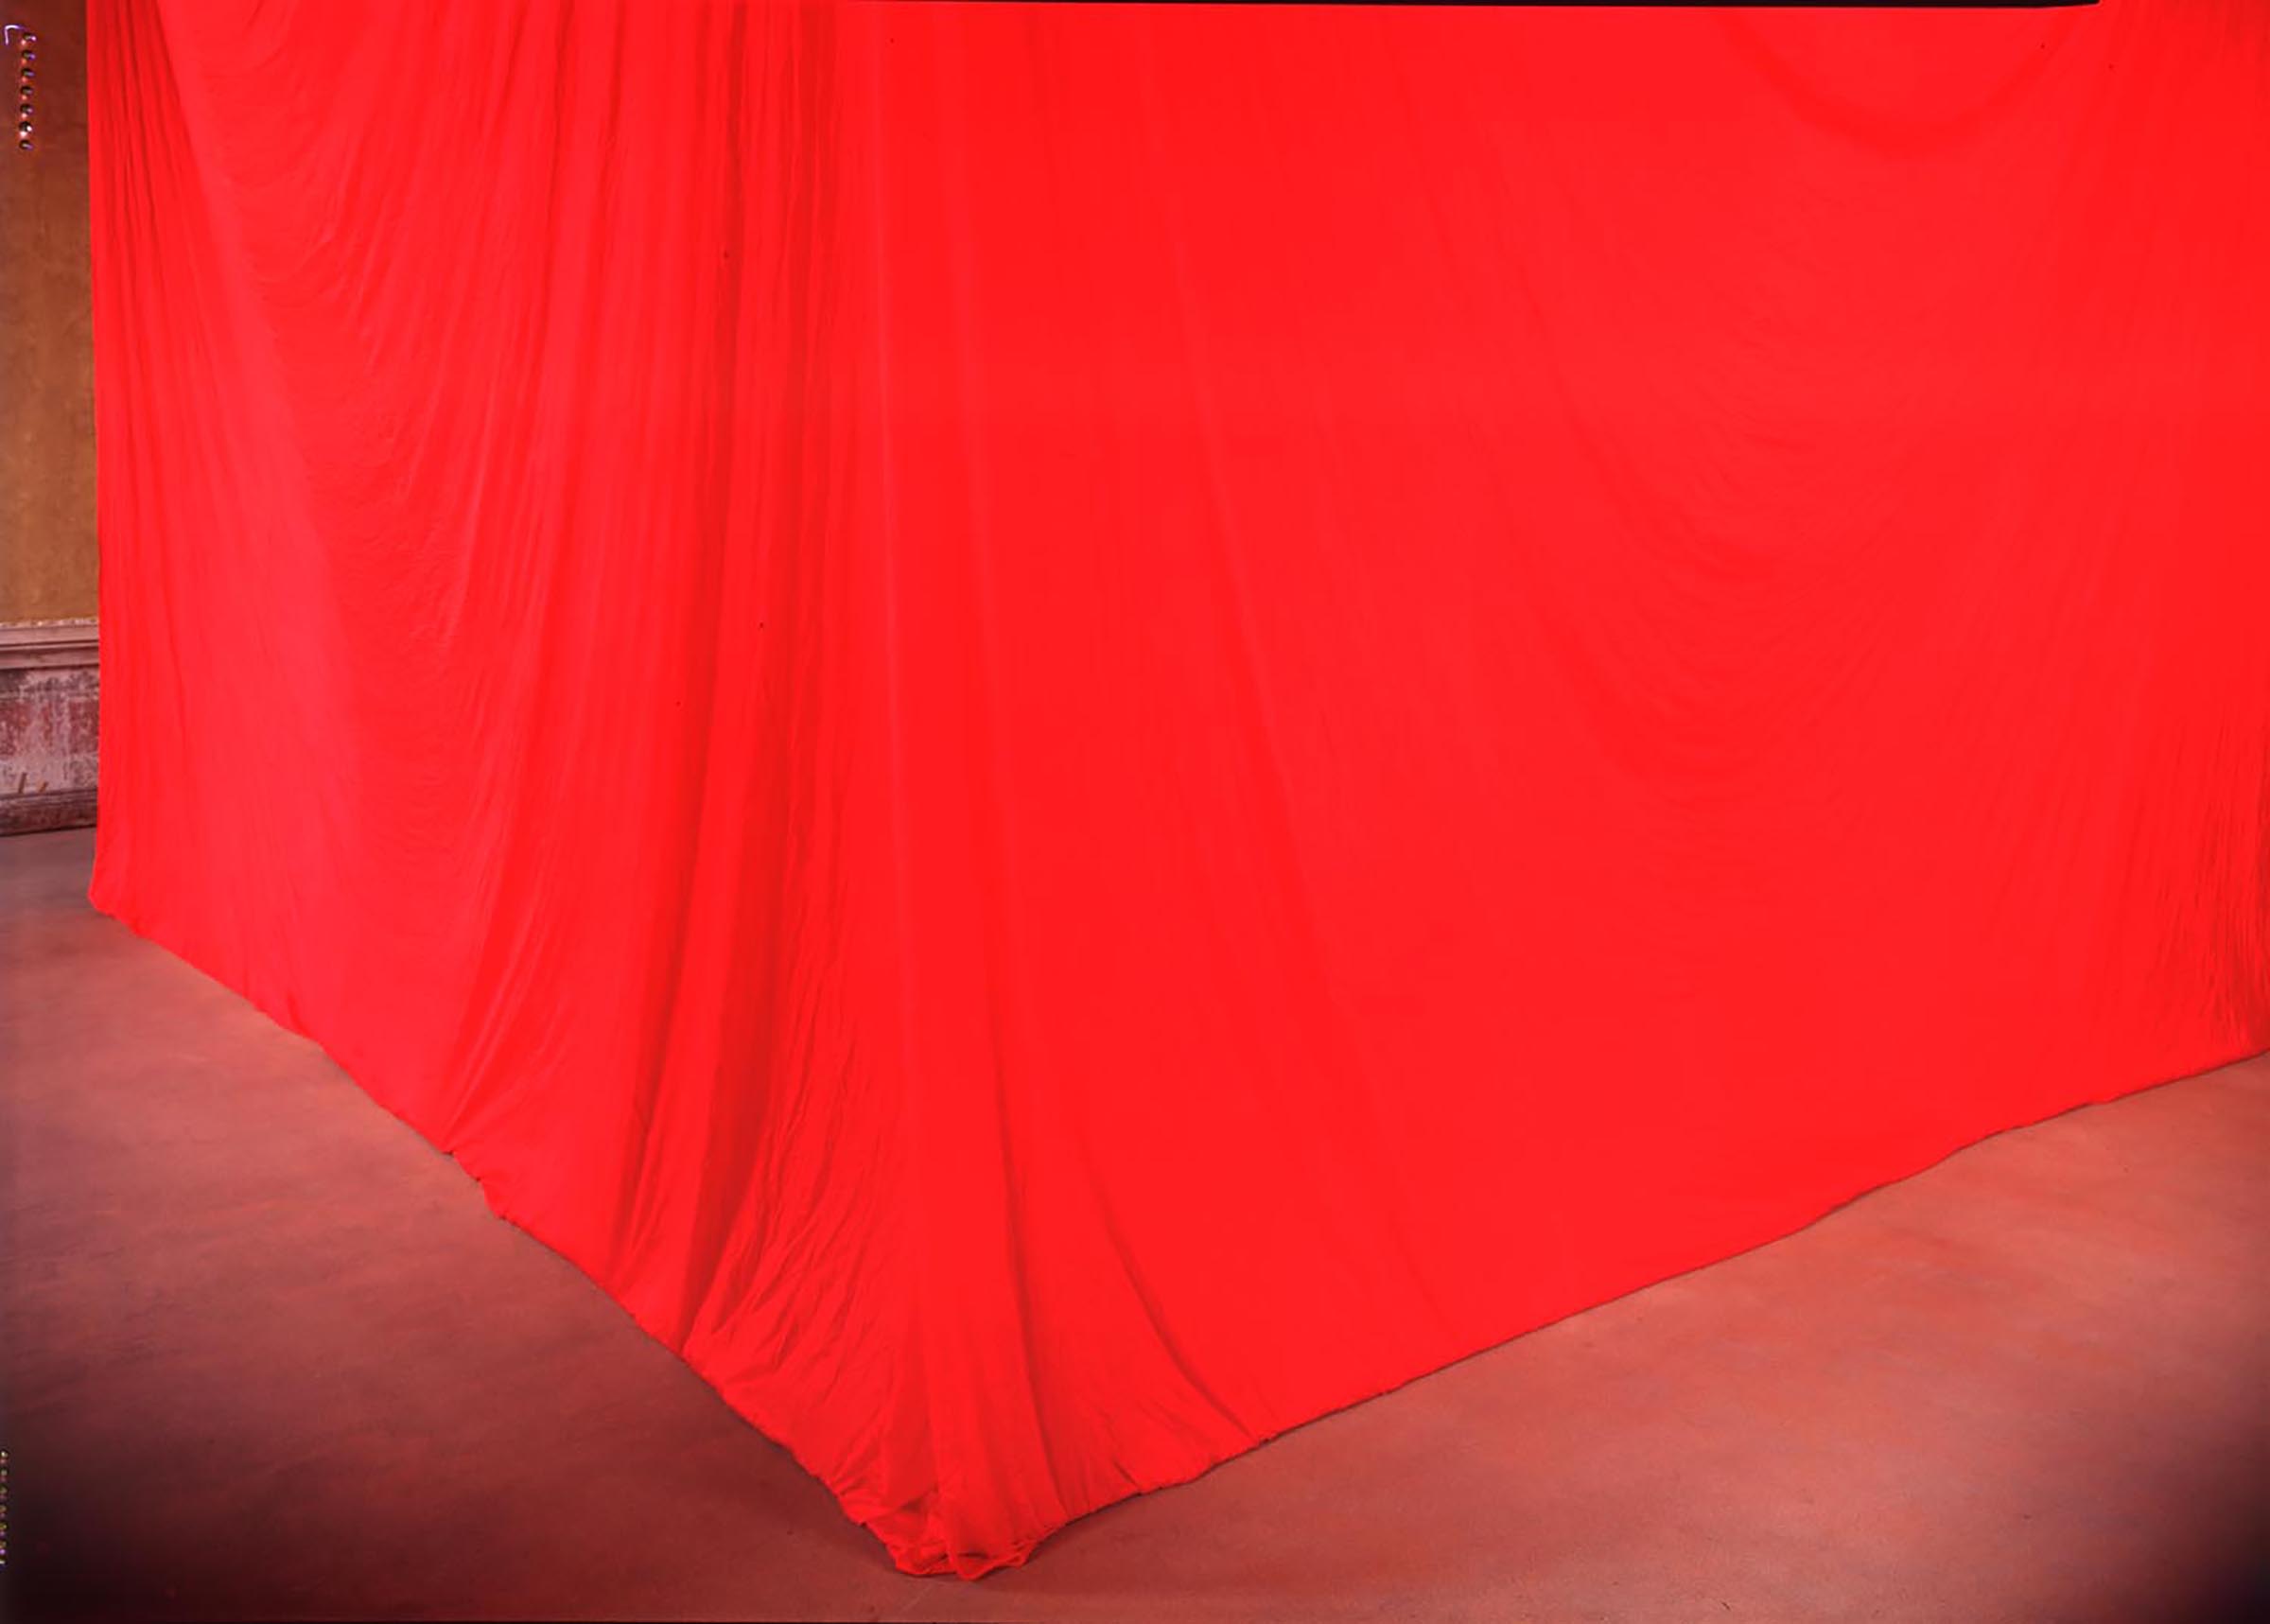 James Lee Byars, The red tent